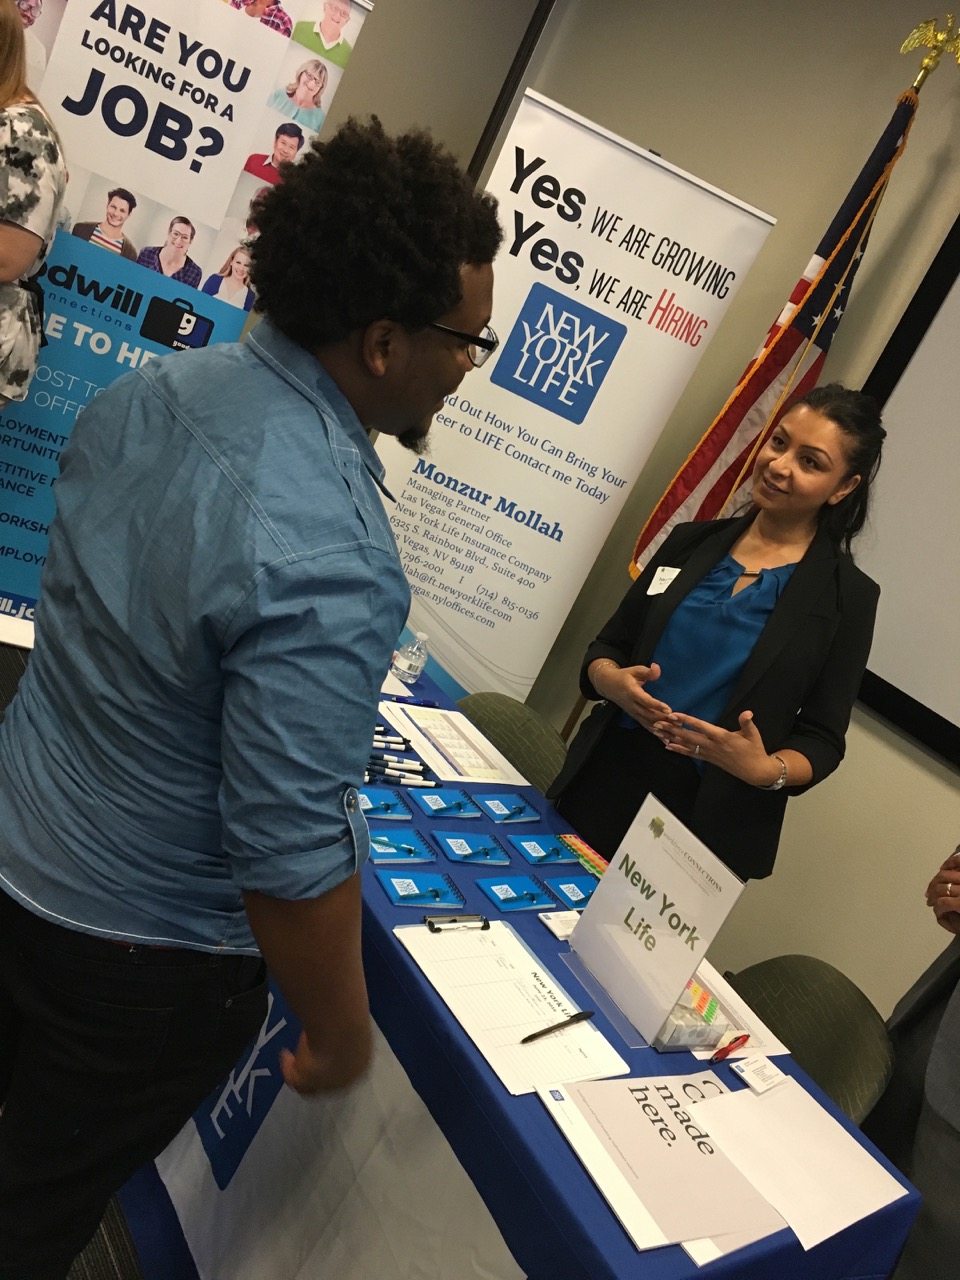 Nearly every local youth aged 16 to 24 who attended Workforce Connections NxGen Youth Paid Internship Fair on were offered internships by local employers.